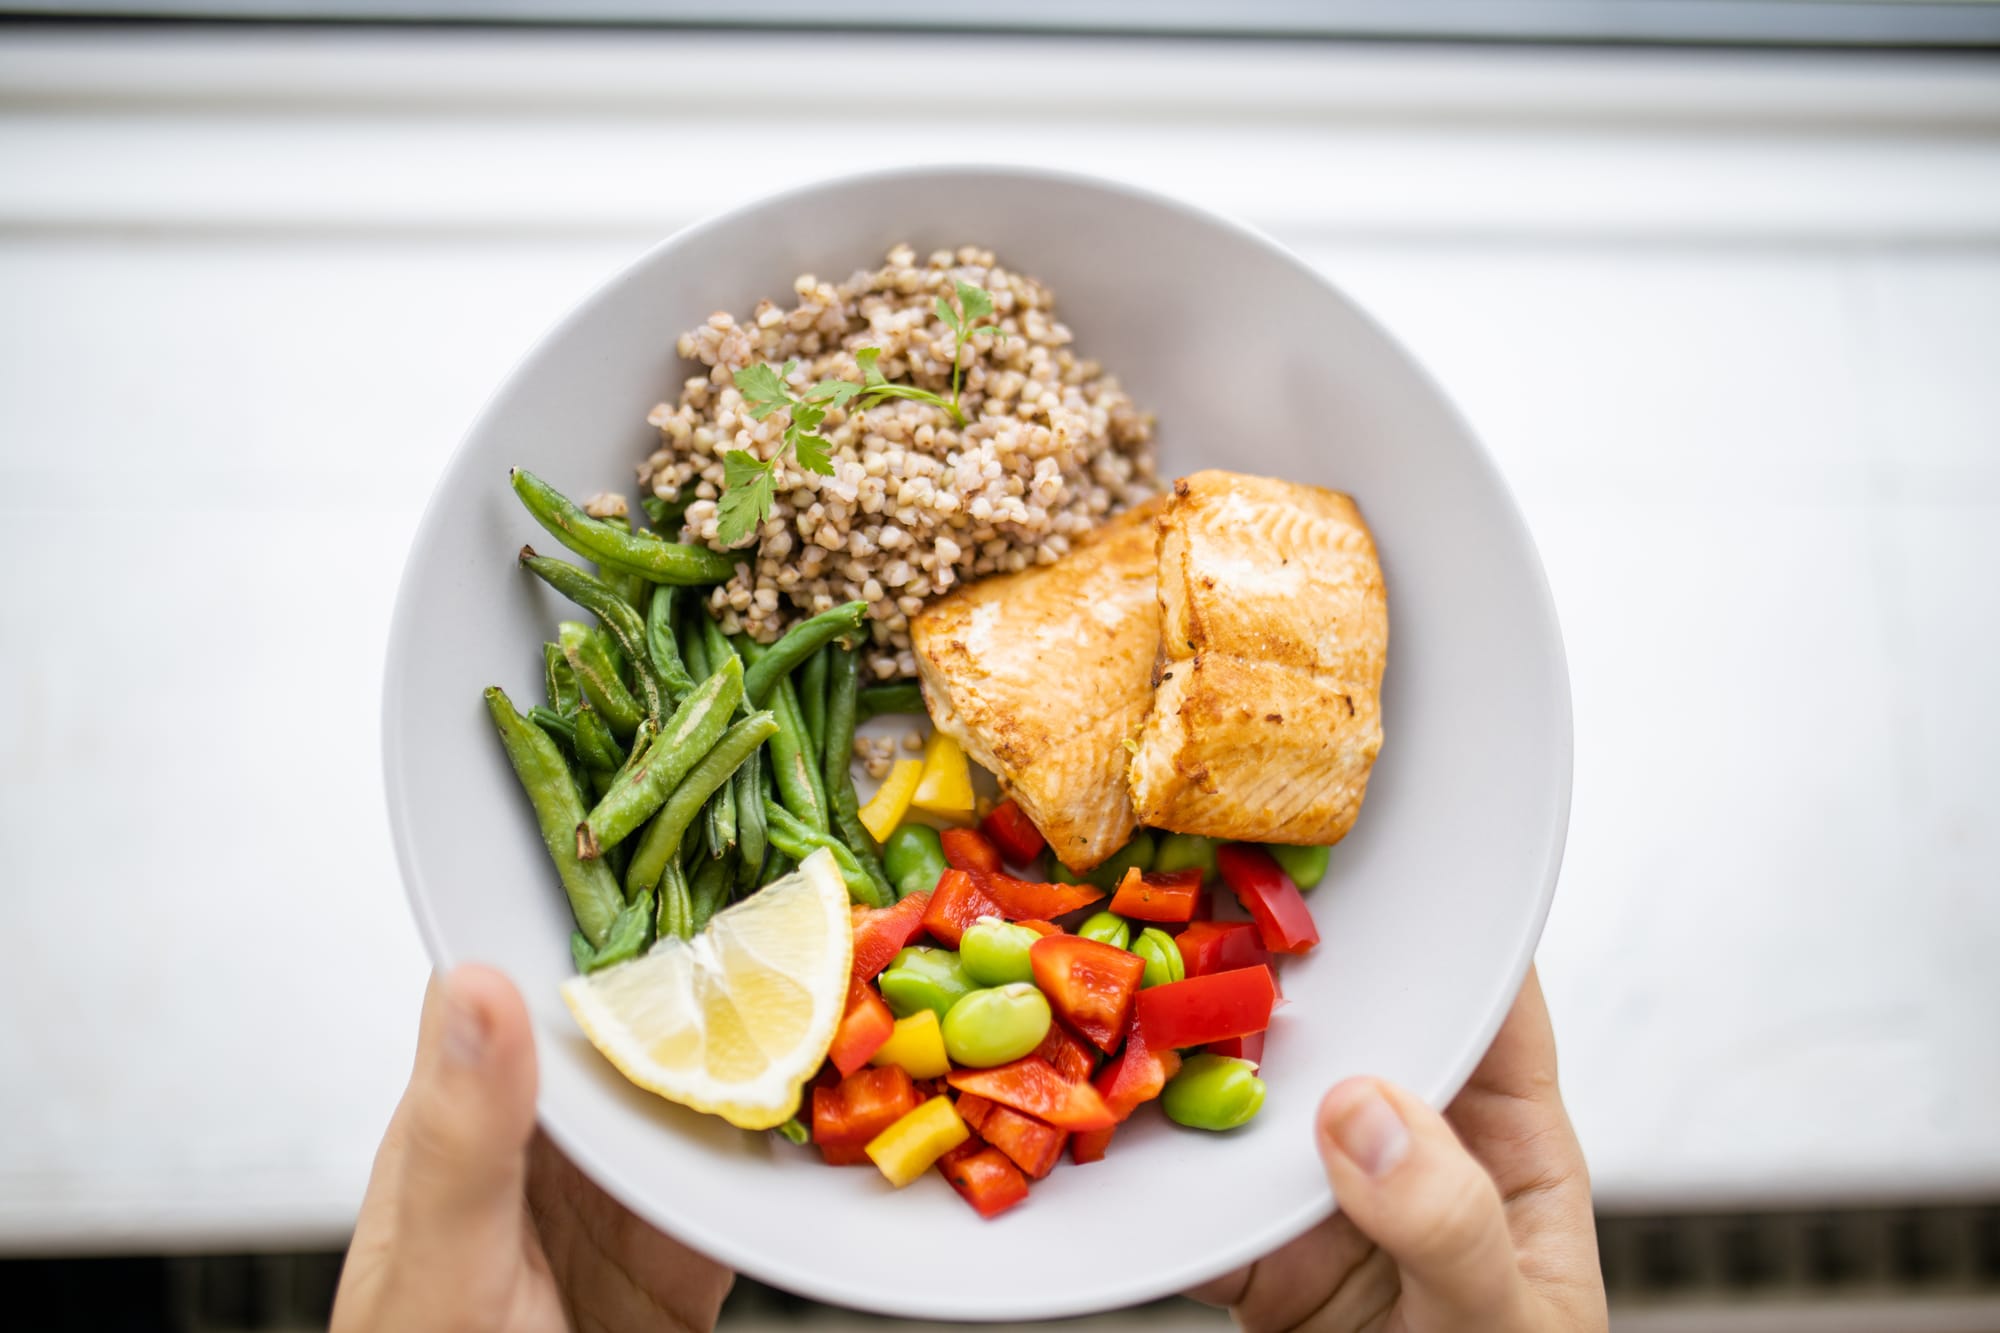 Overhead view of hands holding a plate with salmon, rice, green beans, broad beans, and tomato slices.